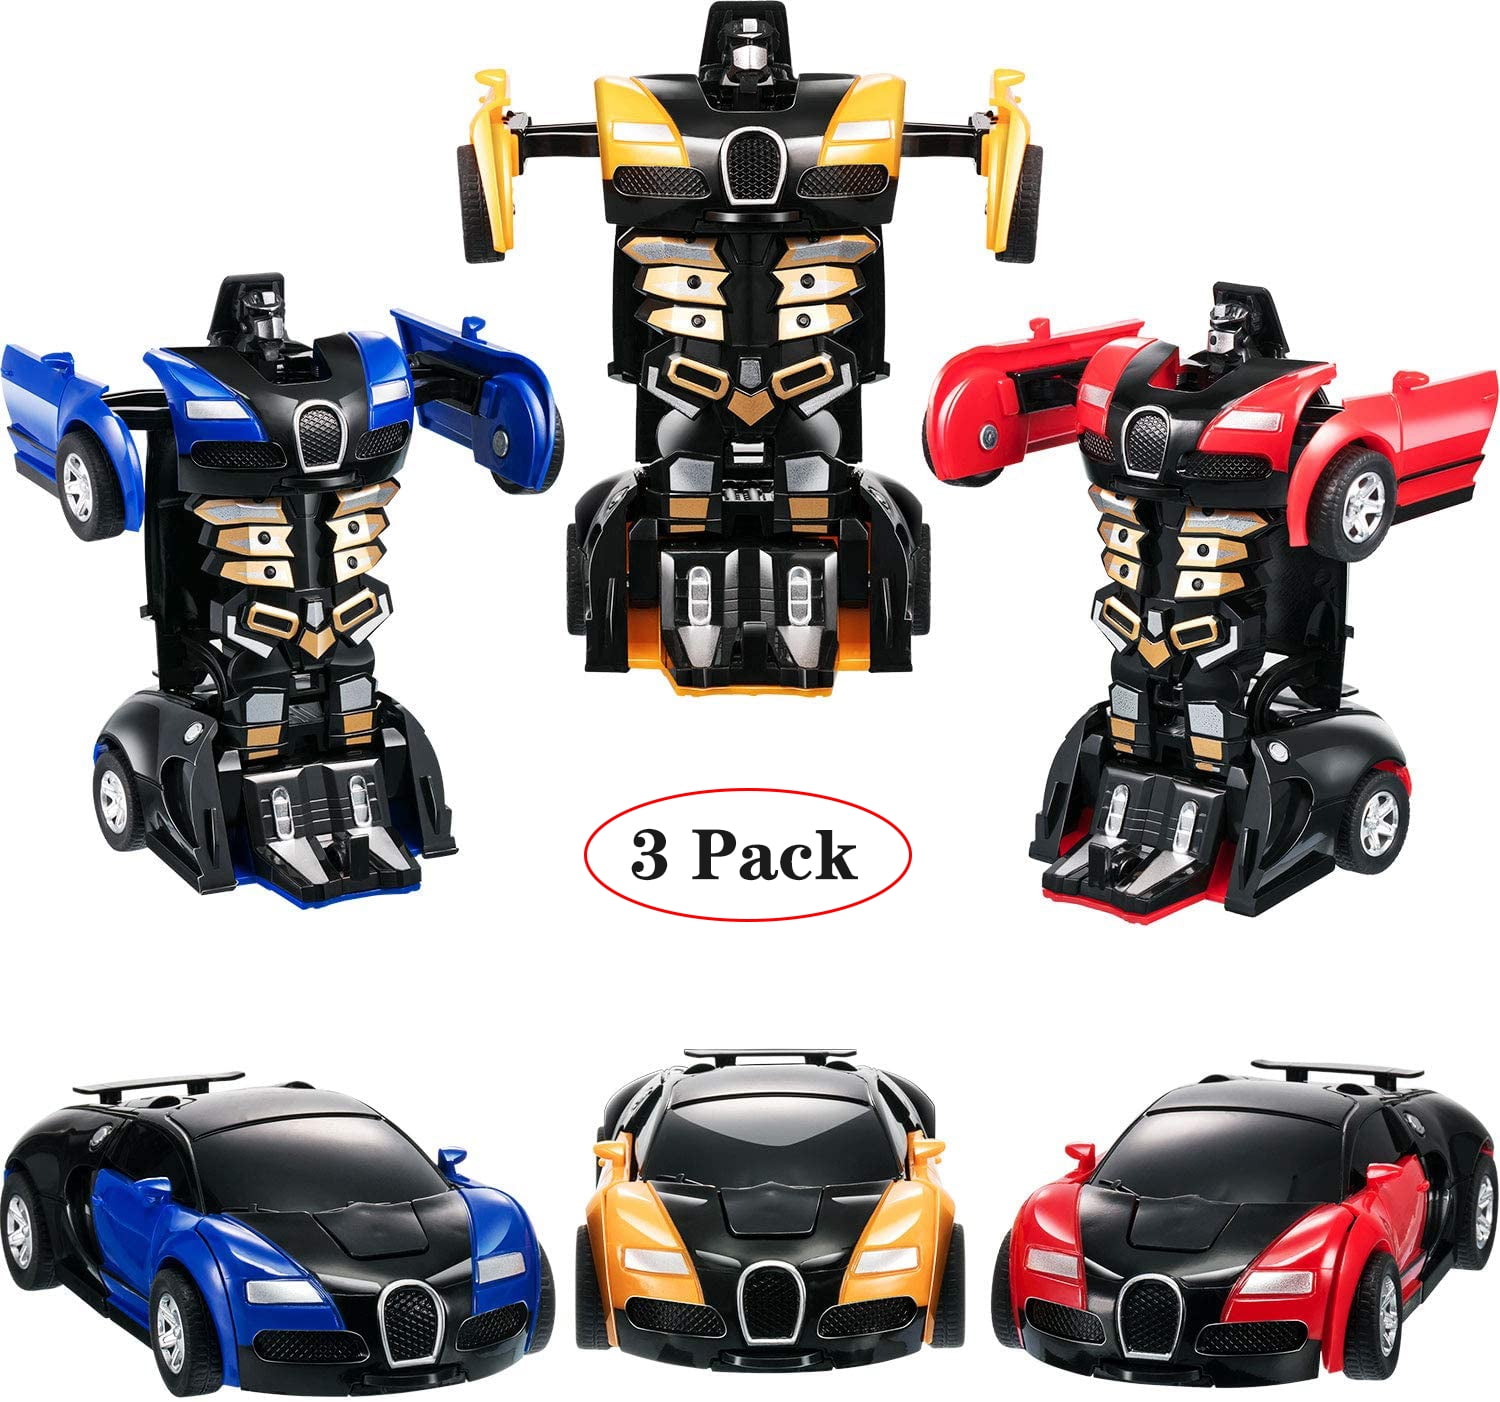 HTTDD Deformation Toys Thundercracker Kids Deformation Robot Action Figure as Gift for Boys and Girls Suitable for Children and Adults Toy Trucks